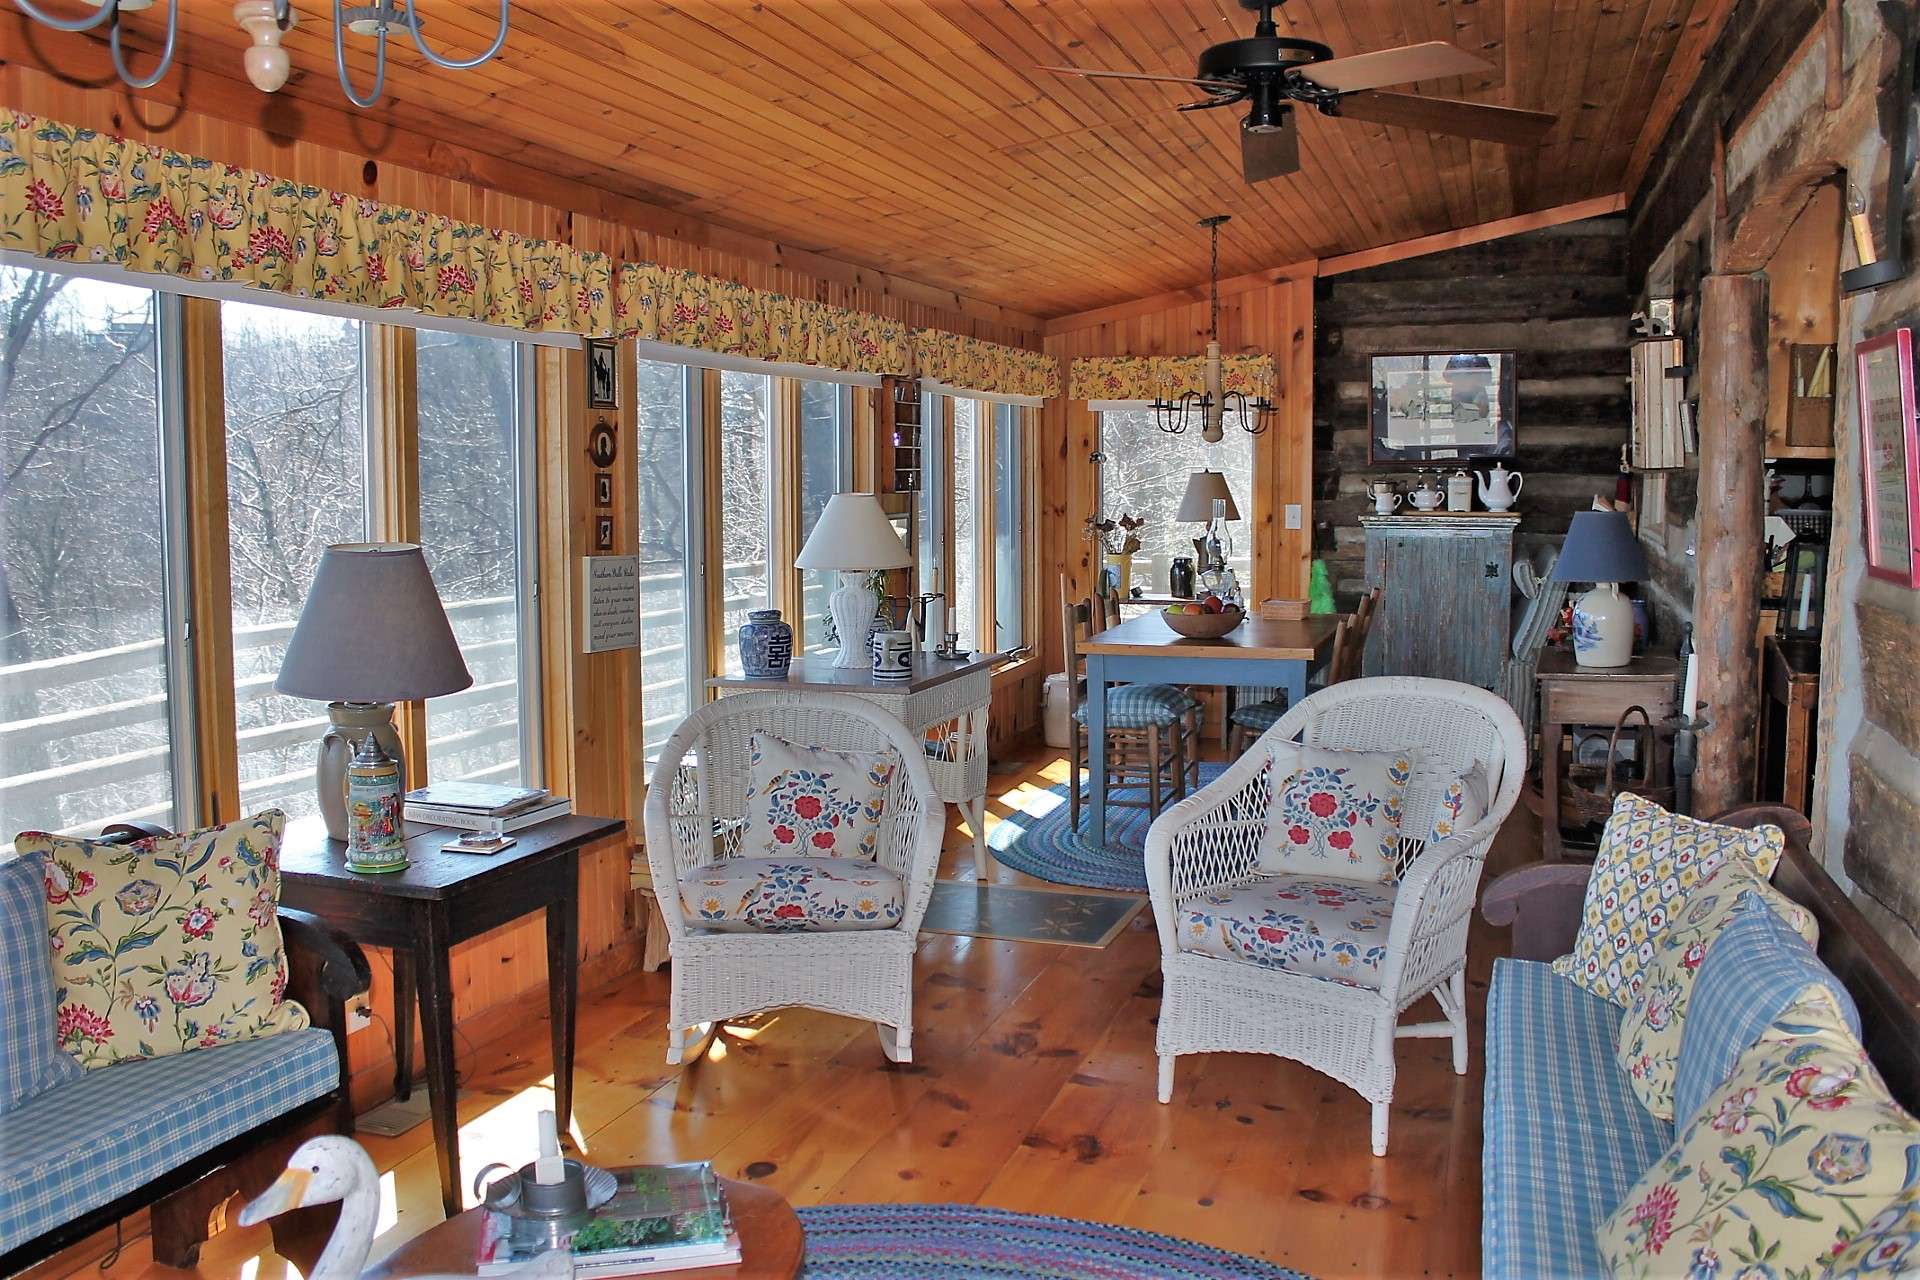 Your favorite spot in the cabin might be this bright sunroom with abundant windows to bring in the light.